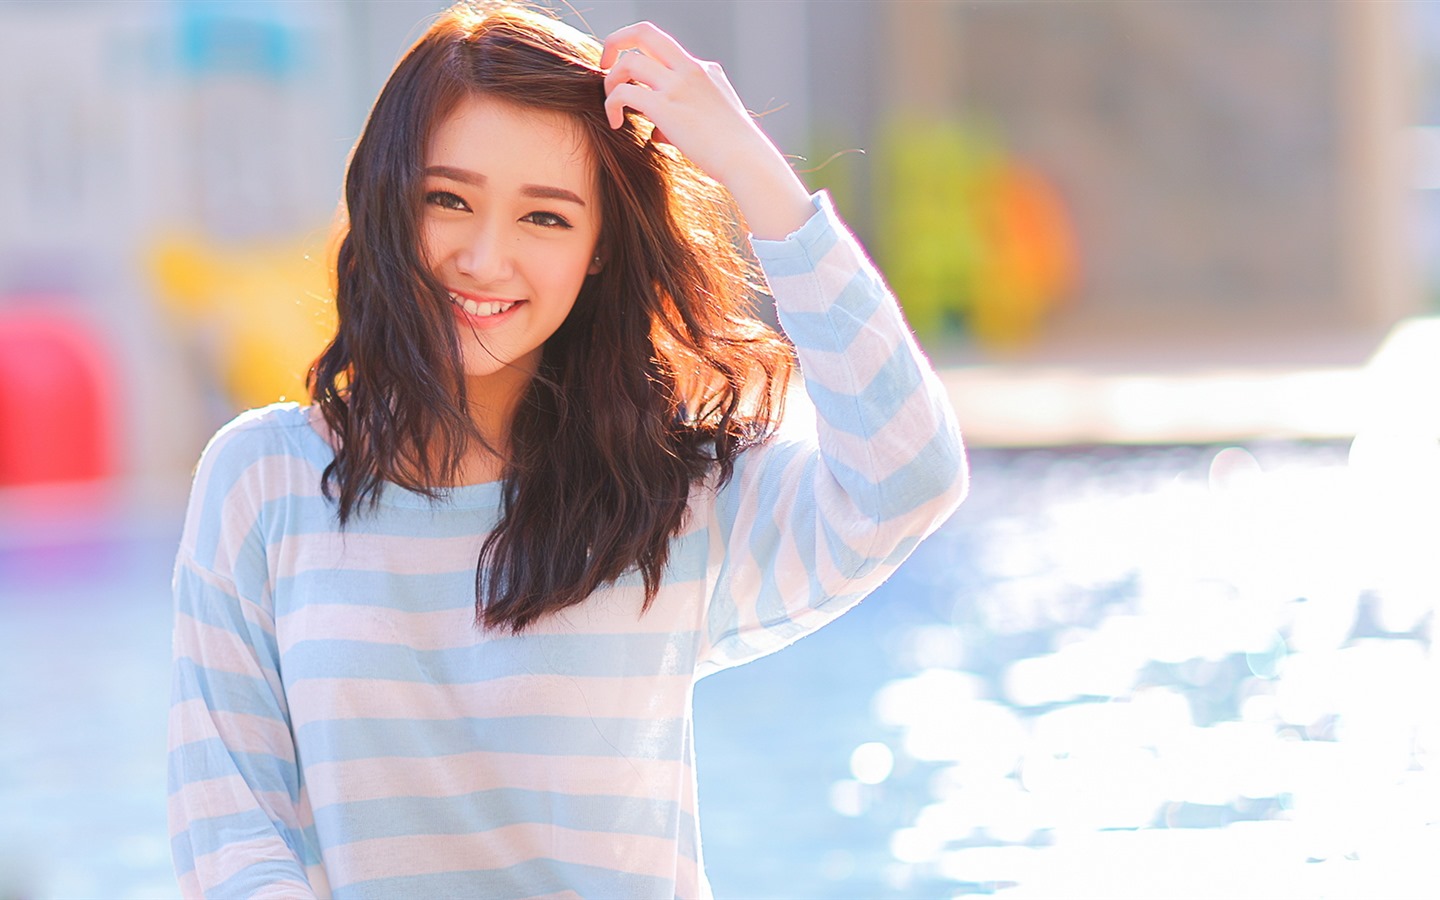 Pure and lovely young Asian girl HD wallpapers collection (1) #22 - 1440x900